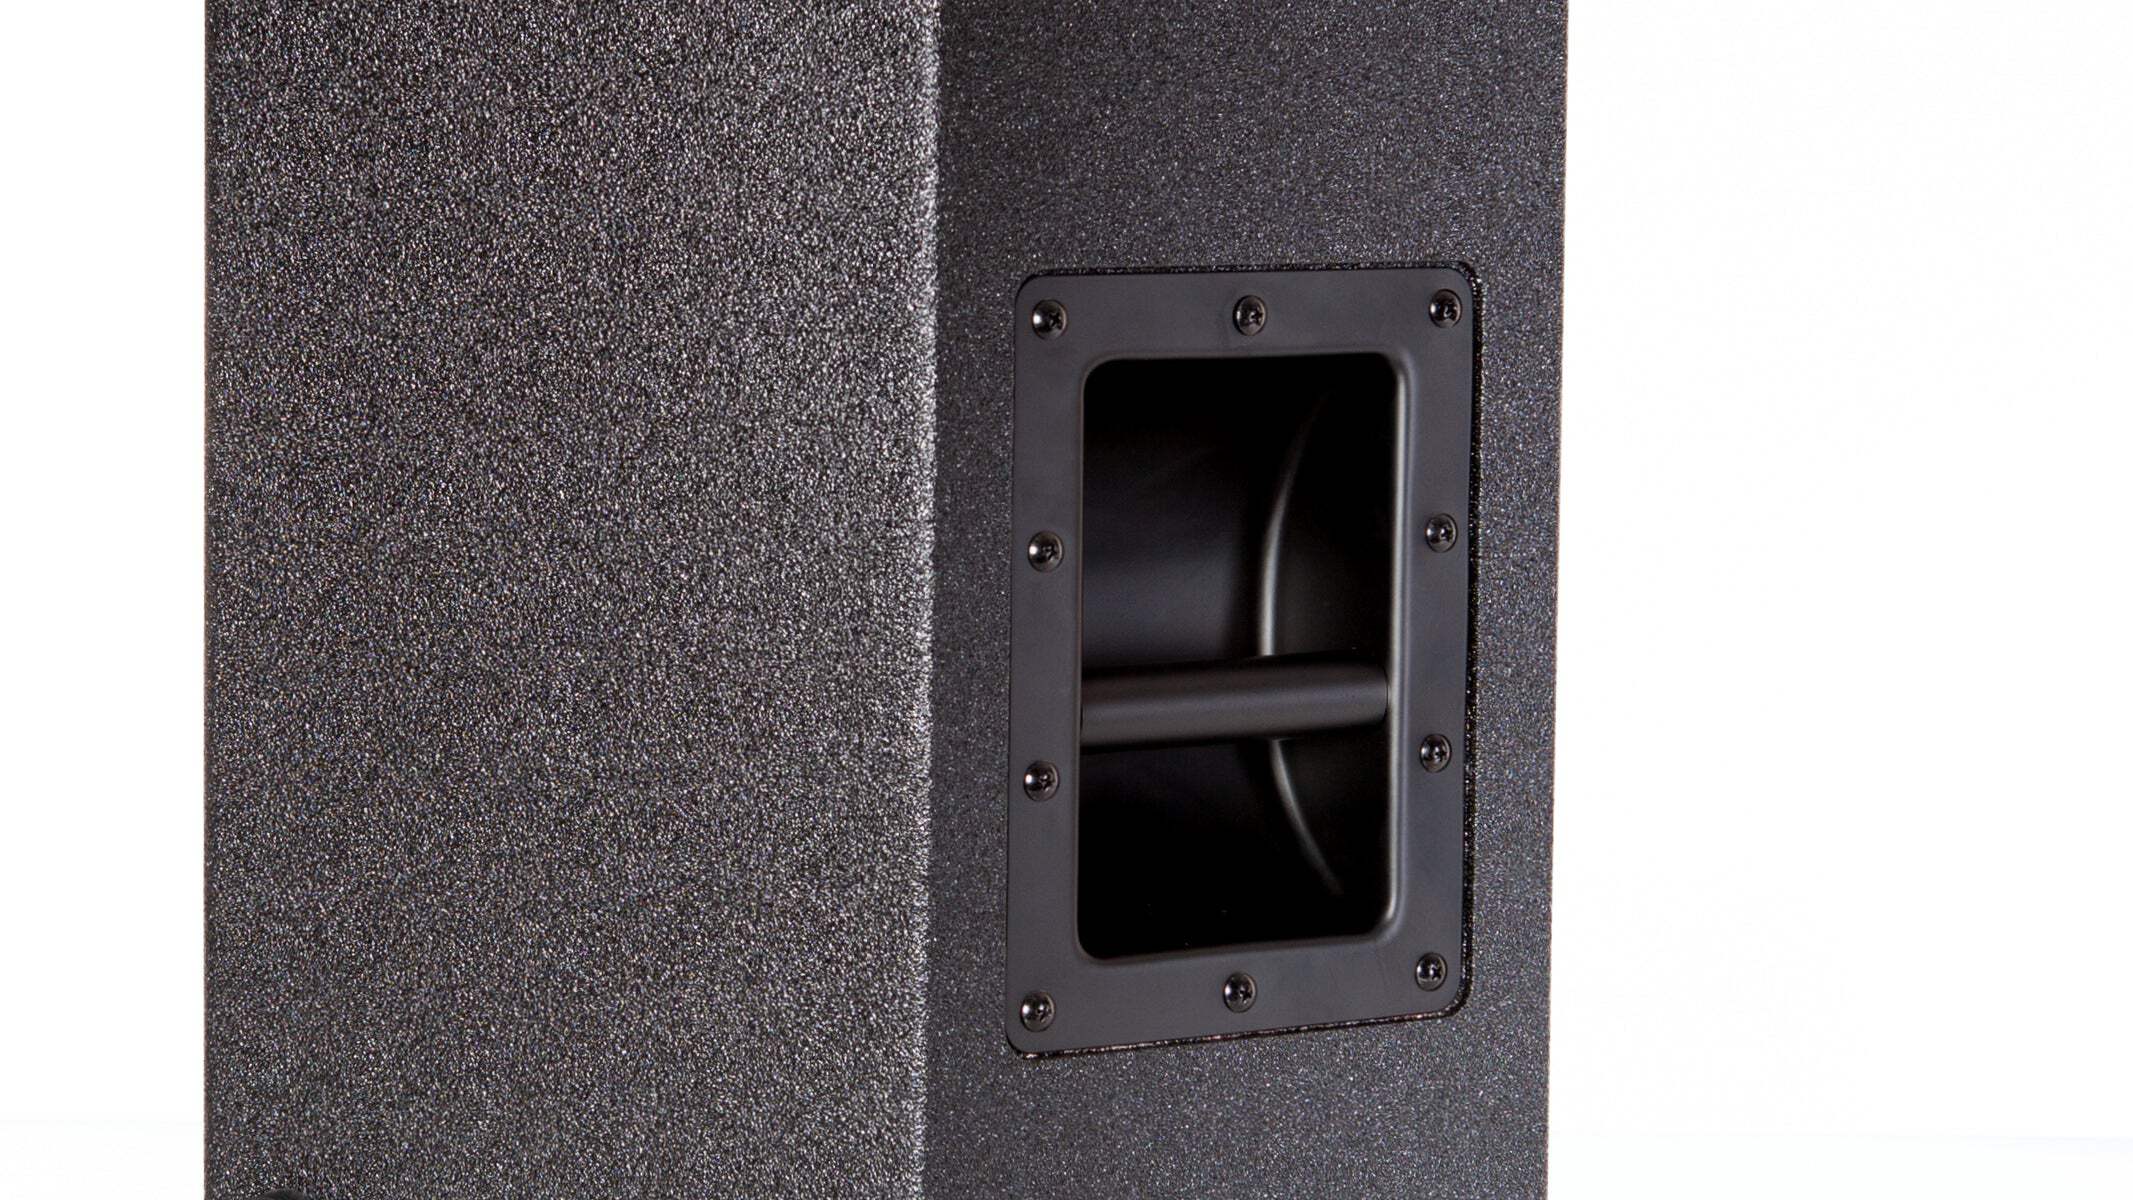 ::Carvin SCx12A 1000W Active 12-Inch Loudspeaker with DSP